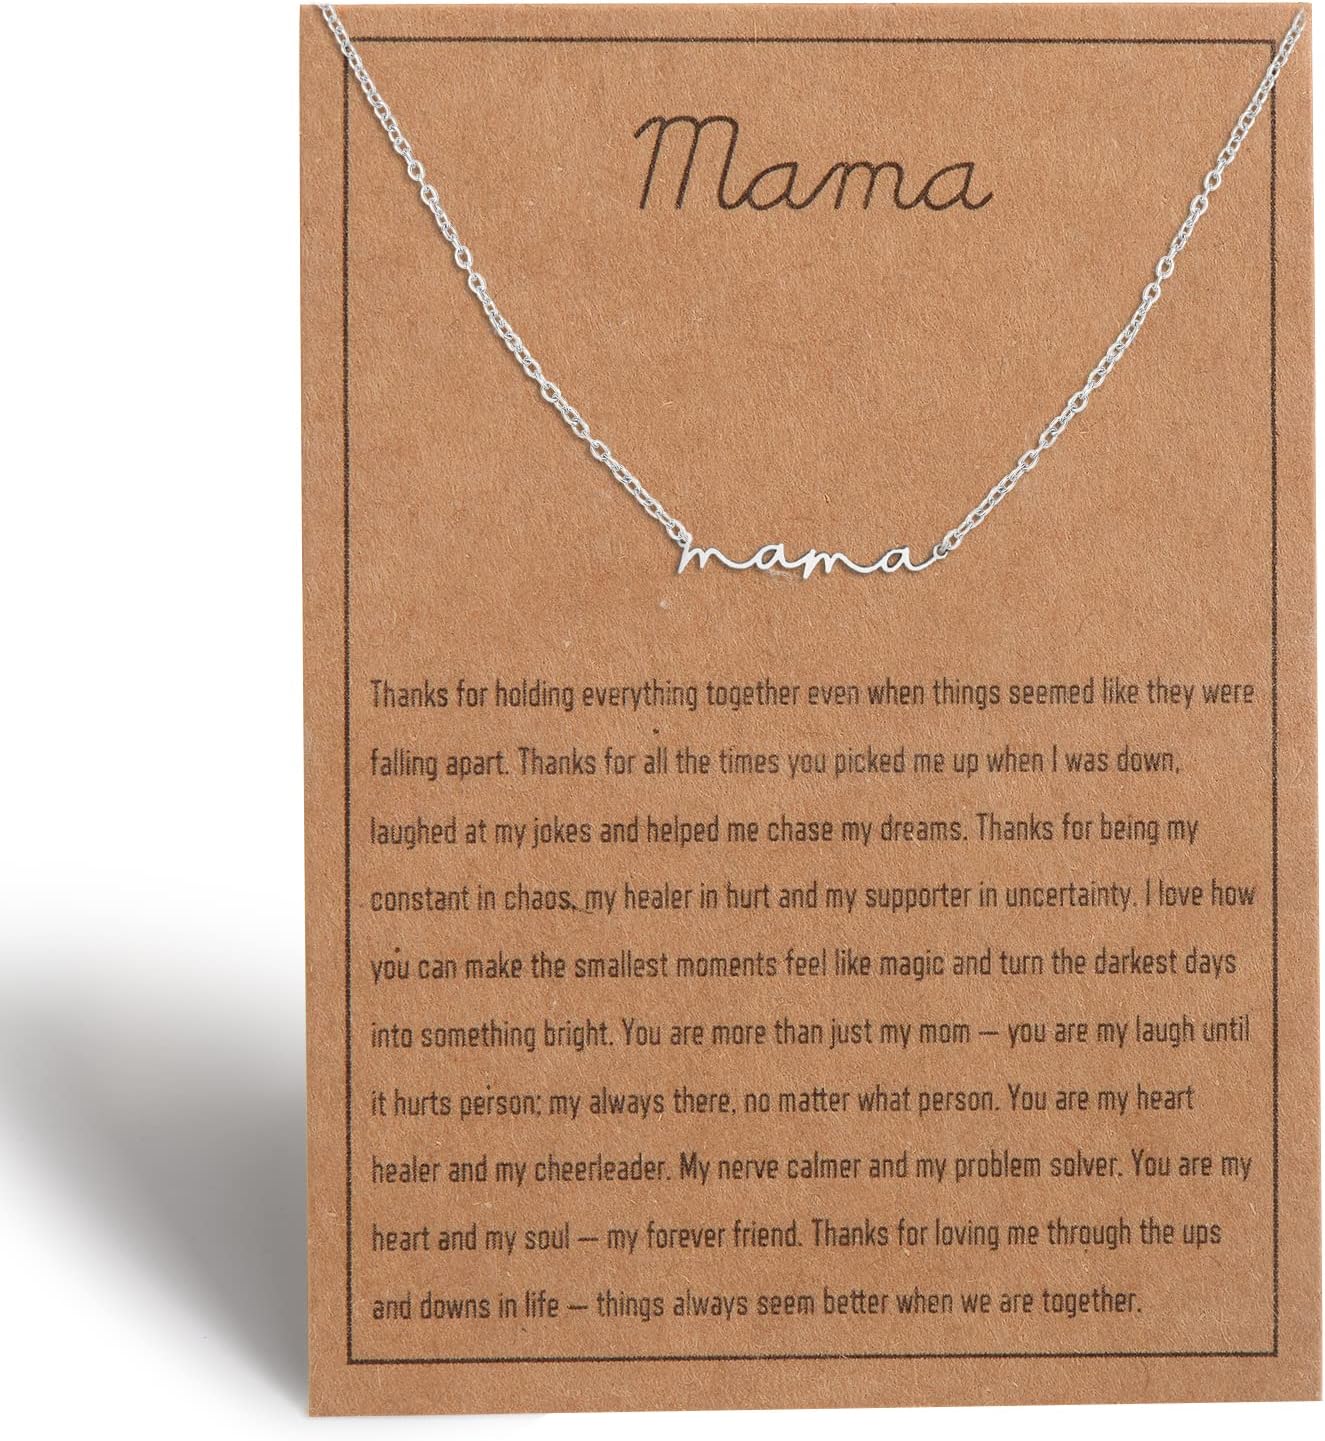 Mama necklace for Women - Silver, Gold & Rose Gold Mom Jewelry for Women, Gifts for New Mom, Expecting Mom Gift for Pregnant Friend, Mom to be Gifts with Cards